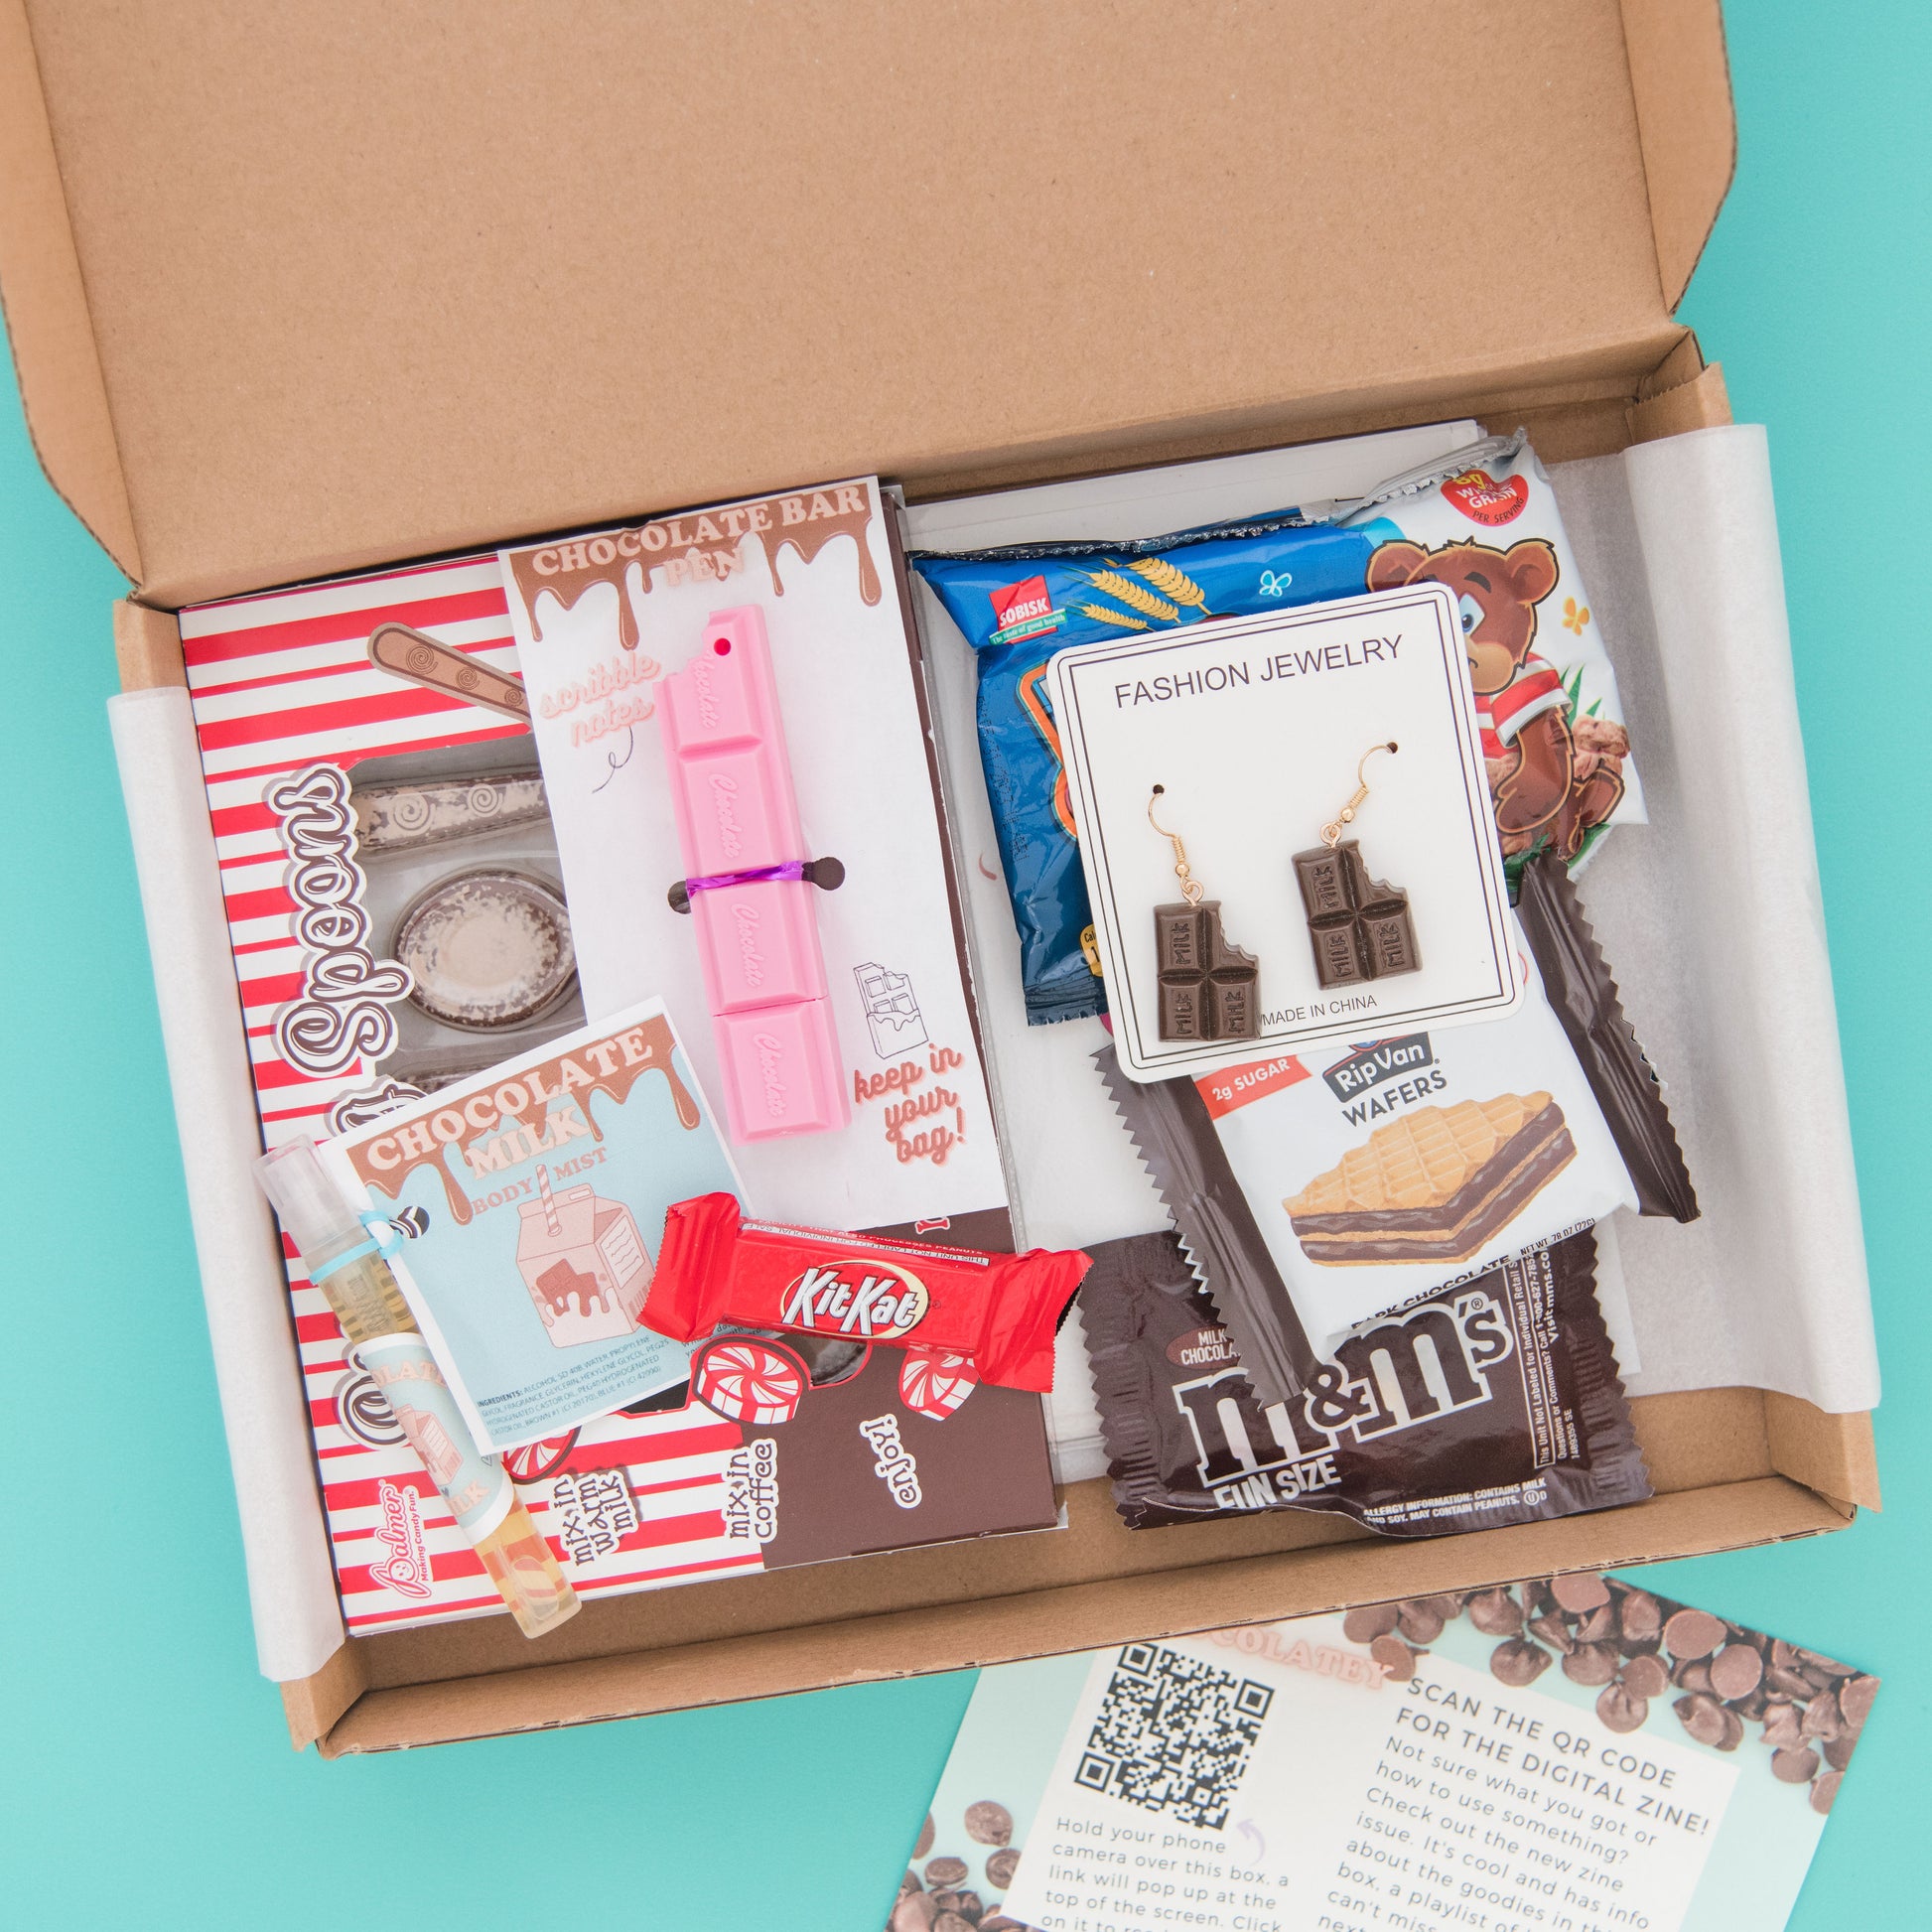 Indulge in a chocolatey delight with our subscription box - featuring a novelty pen, earrings, greeting card, chocolate spoons, and snacks.